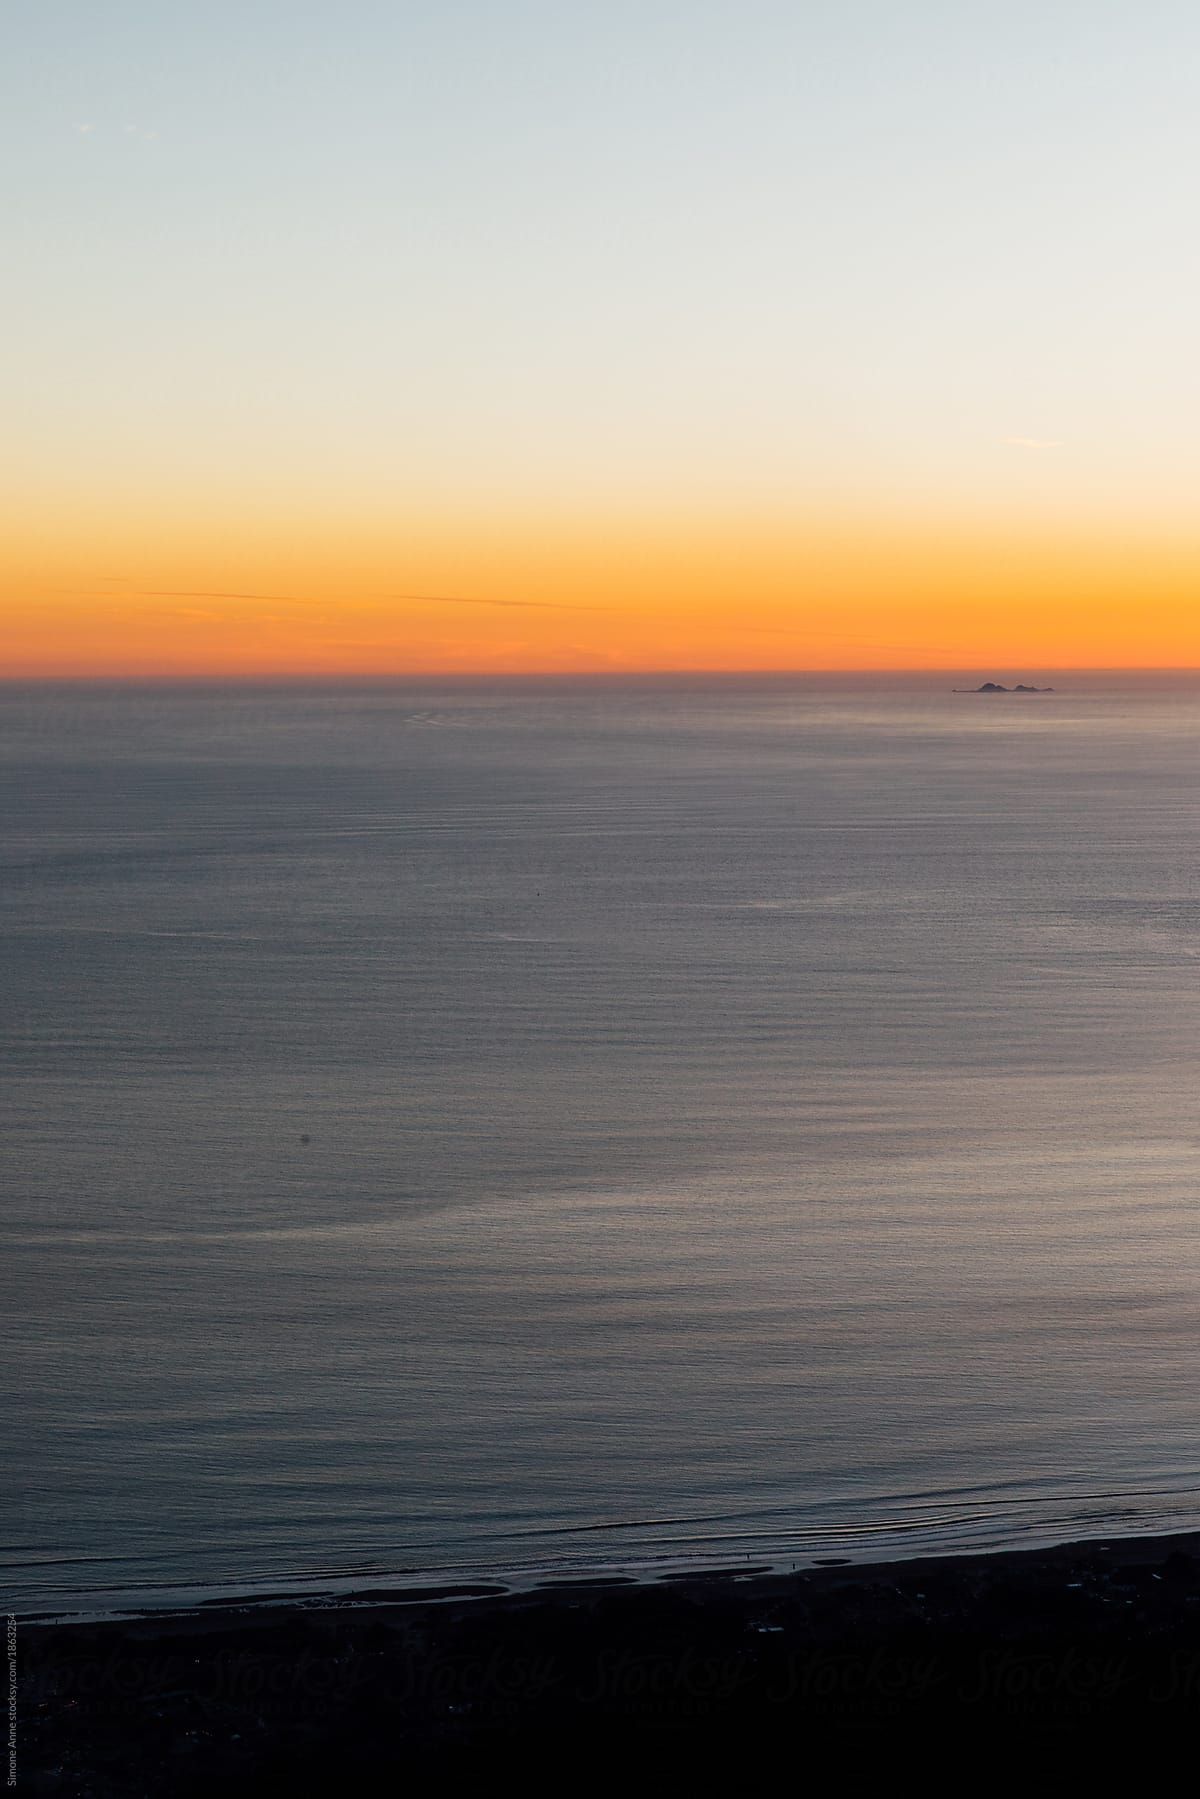 Sunset over the Pacific Ocean in California